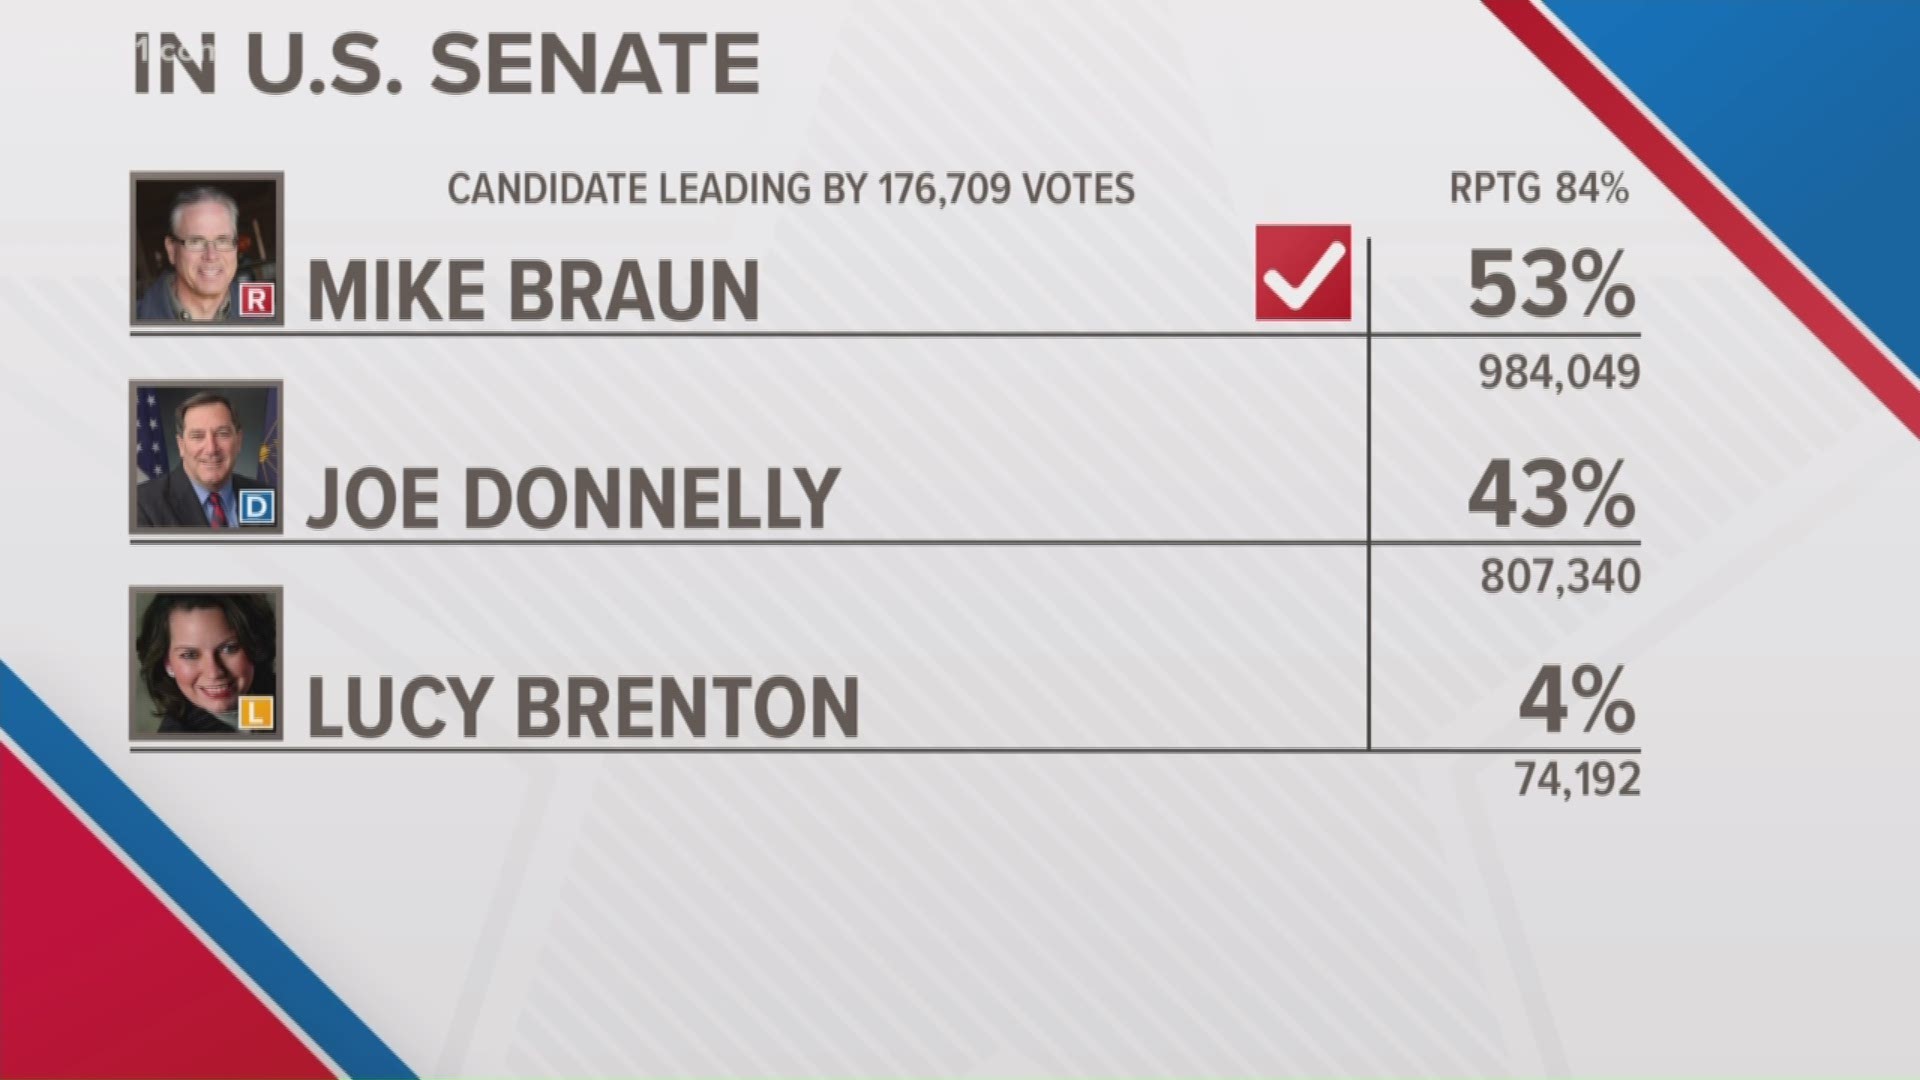 Newcomer Mike Braun is the next Republican to occupy that Senate seat.